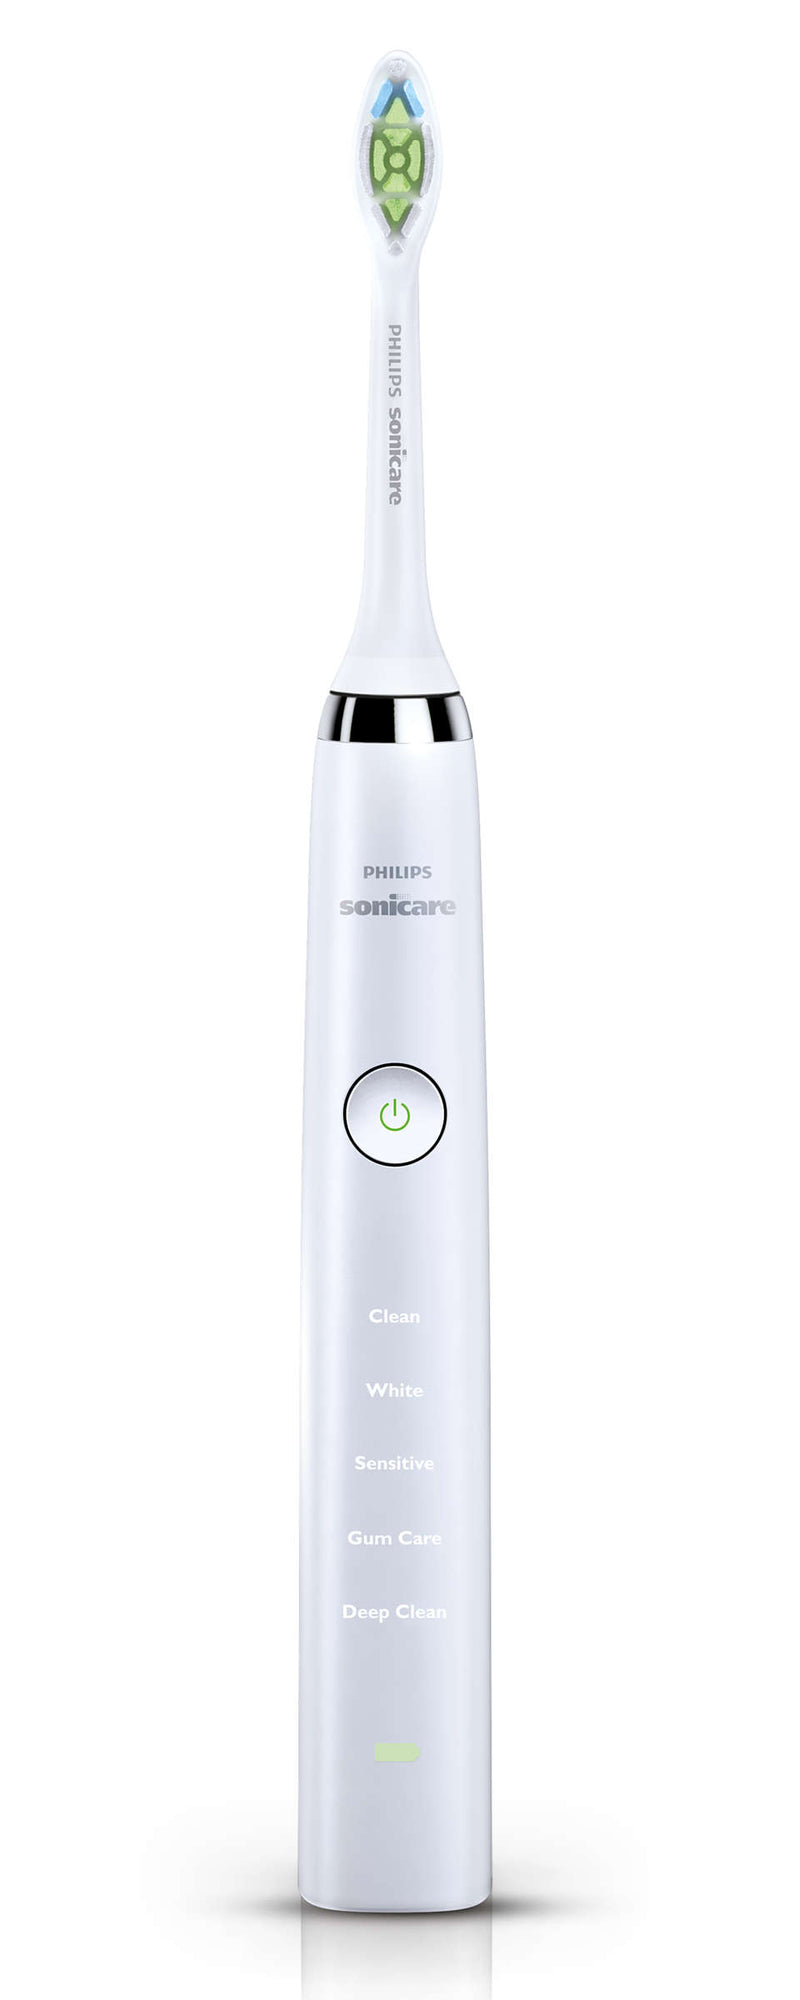 Philips Sonicare Diamond Clean Sonic electric toothbrush